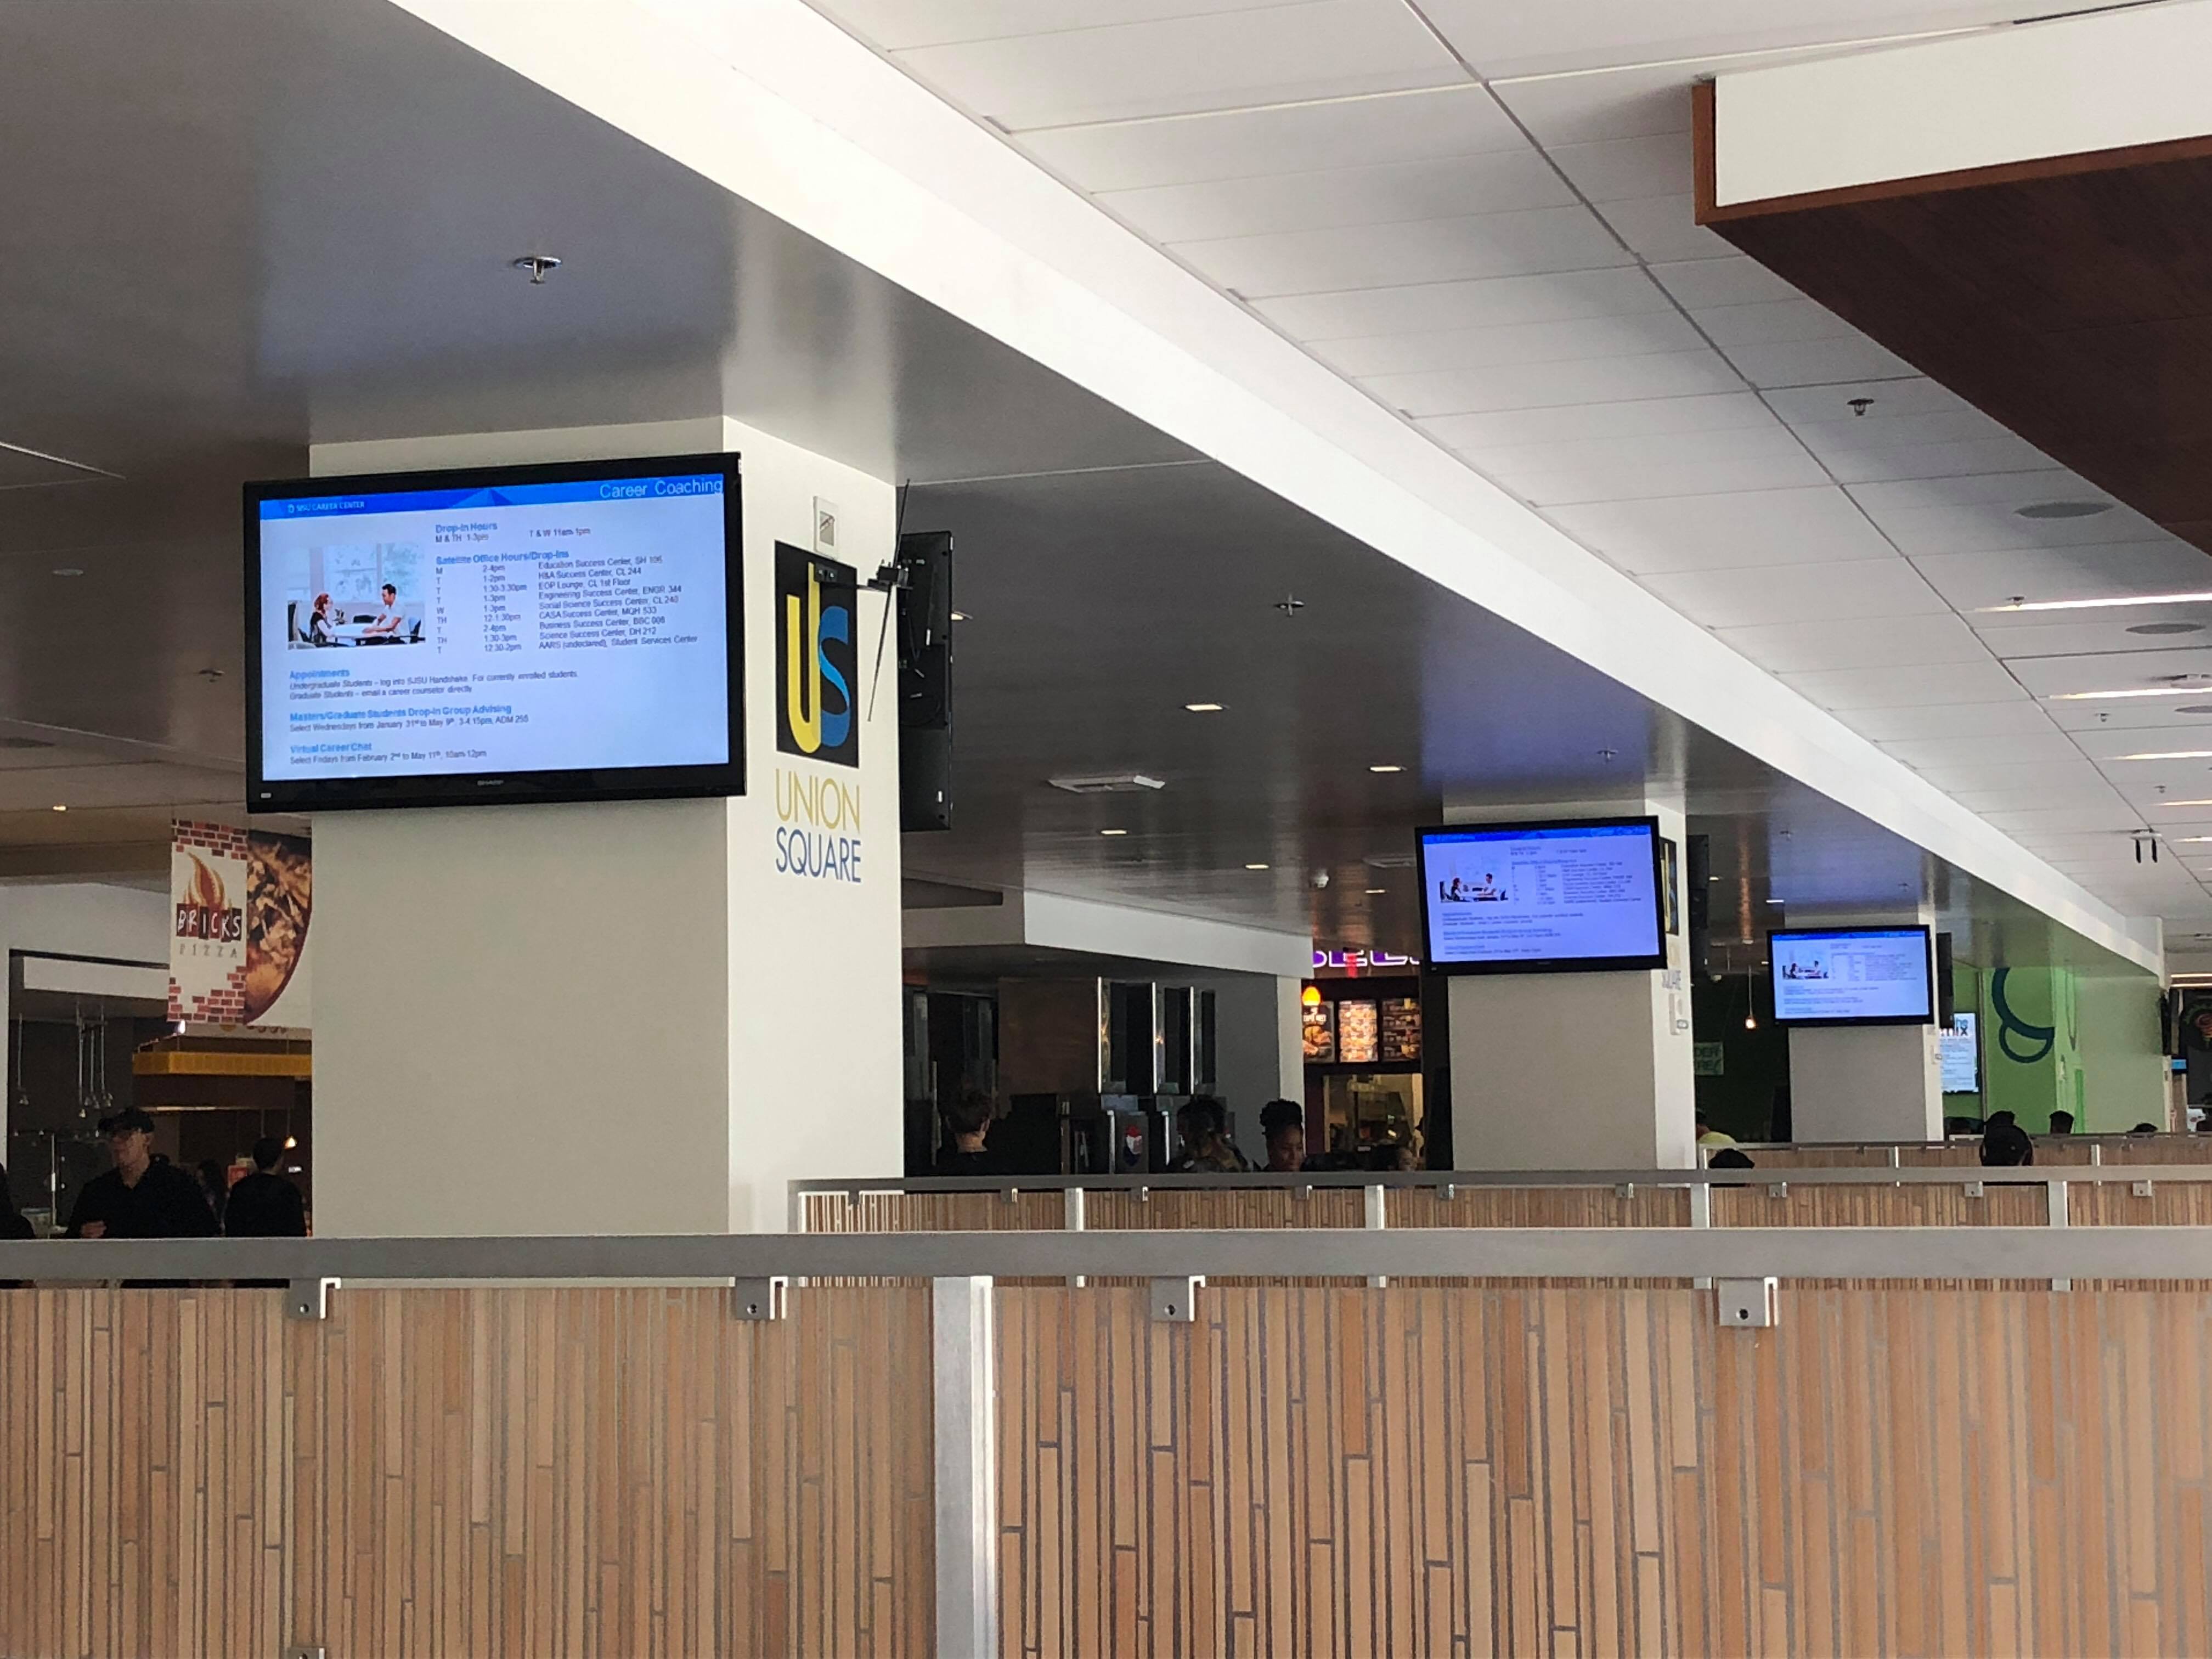 A picture of a digital screen located inside the Student Union.